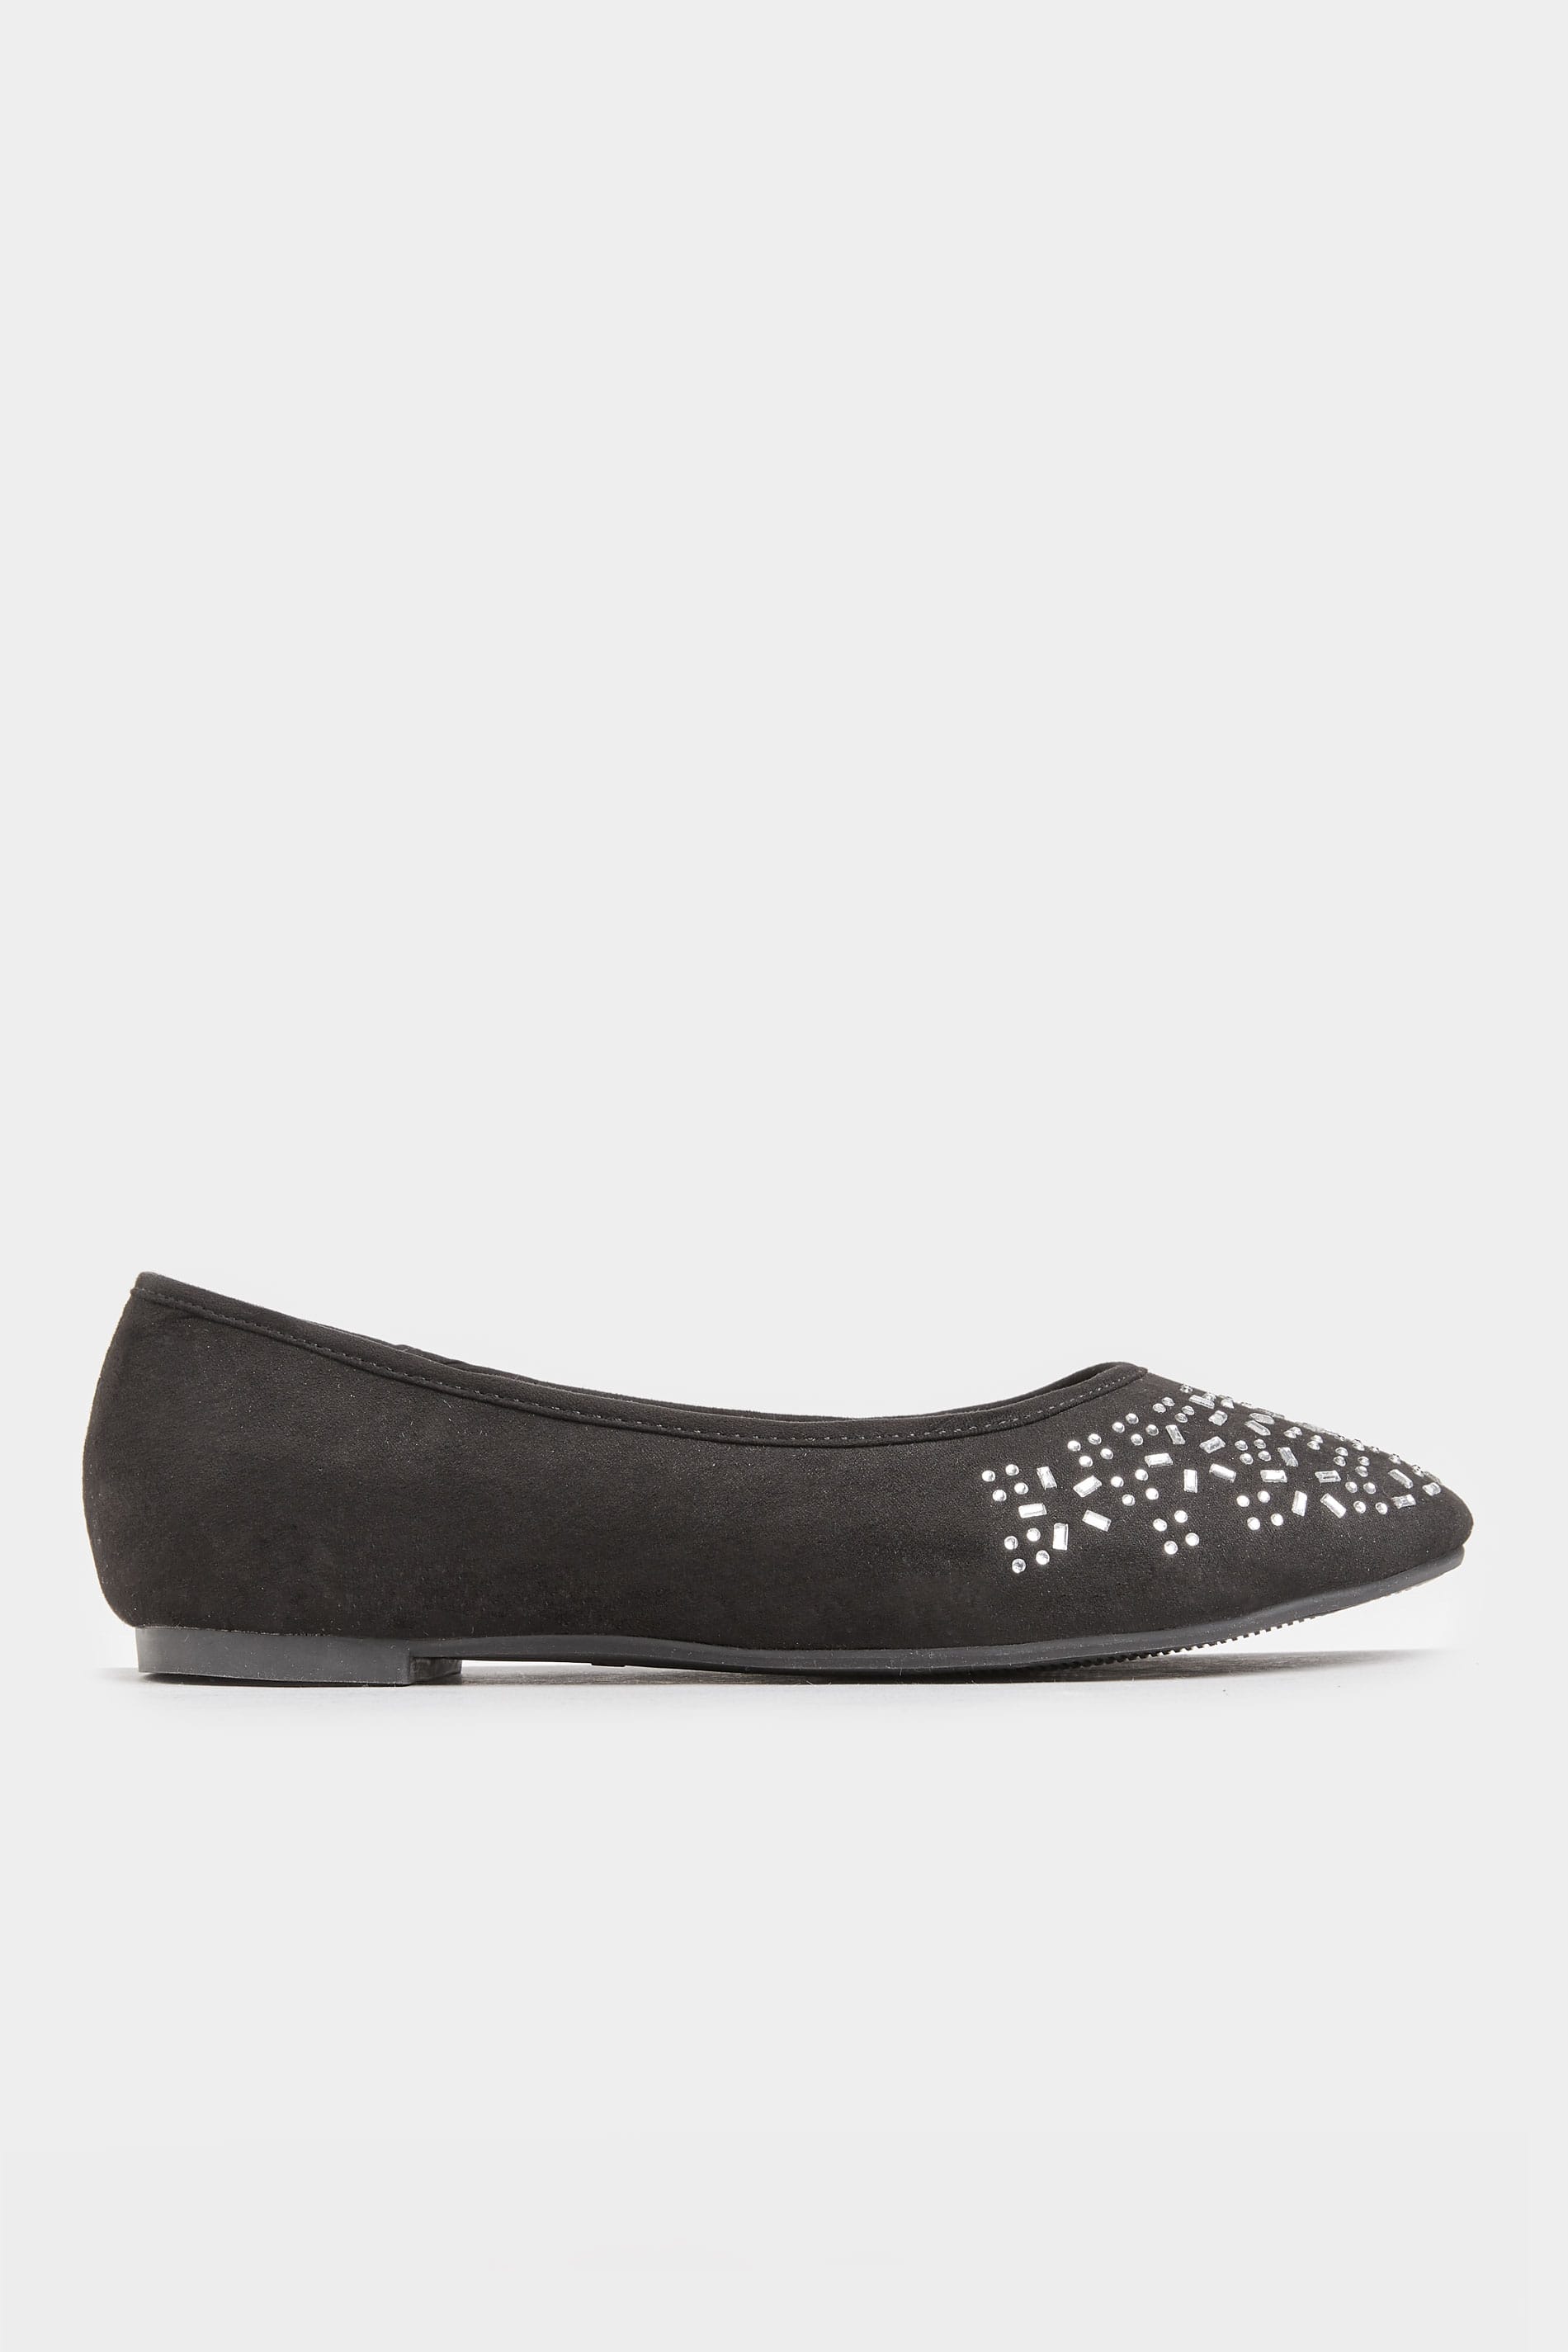 Black Diamante Ballerina Pumps In Extra Wide Fit | Yours Clothing